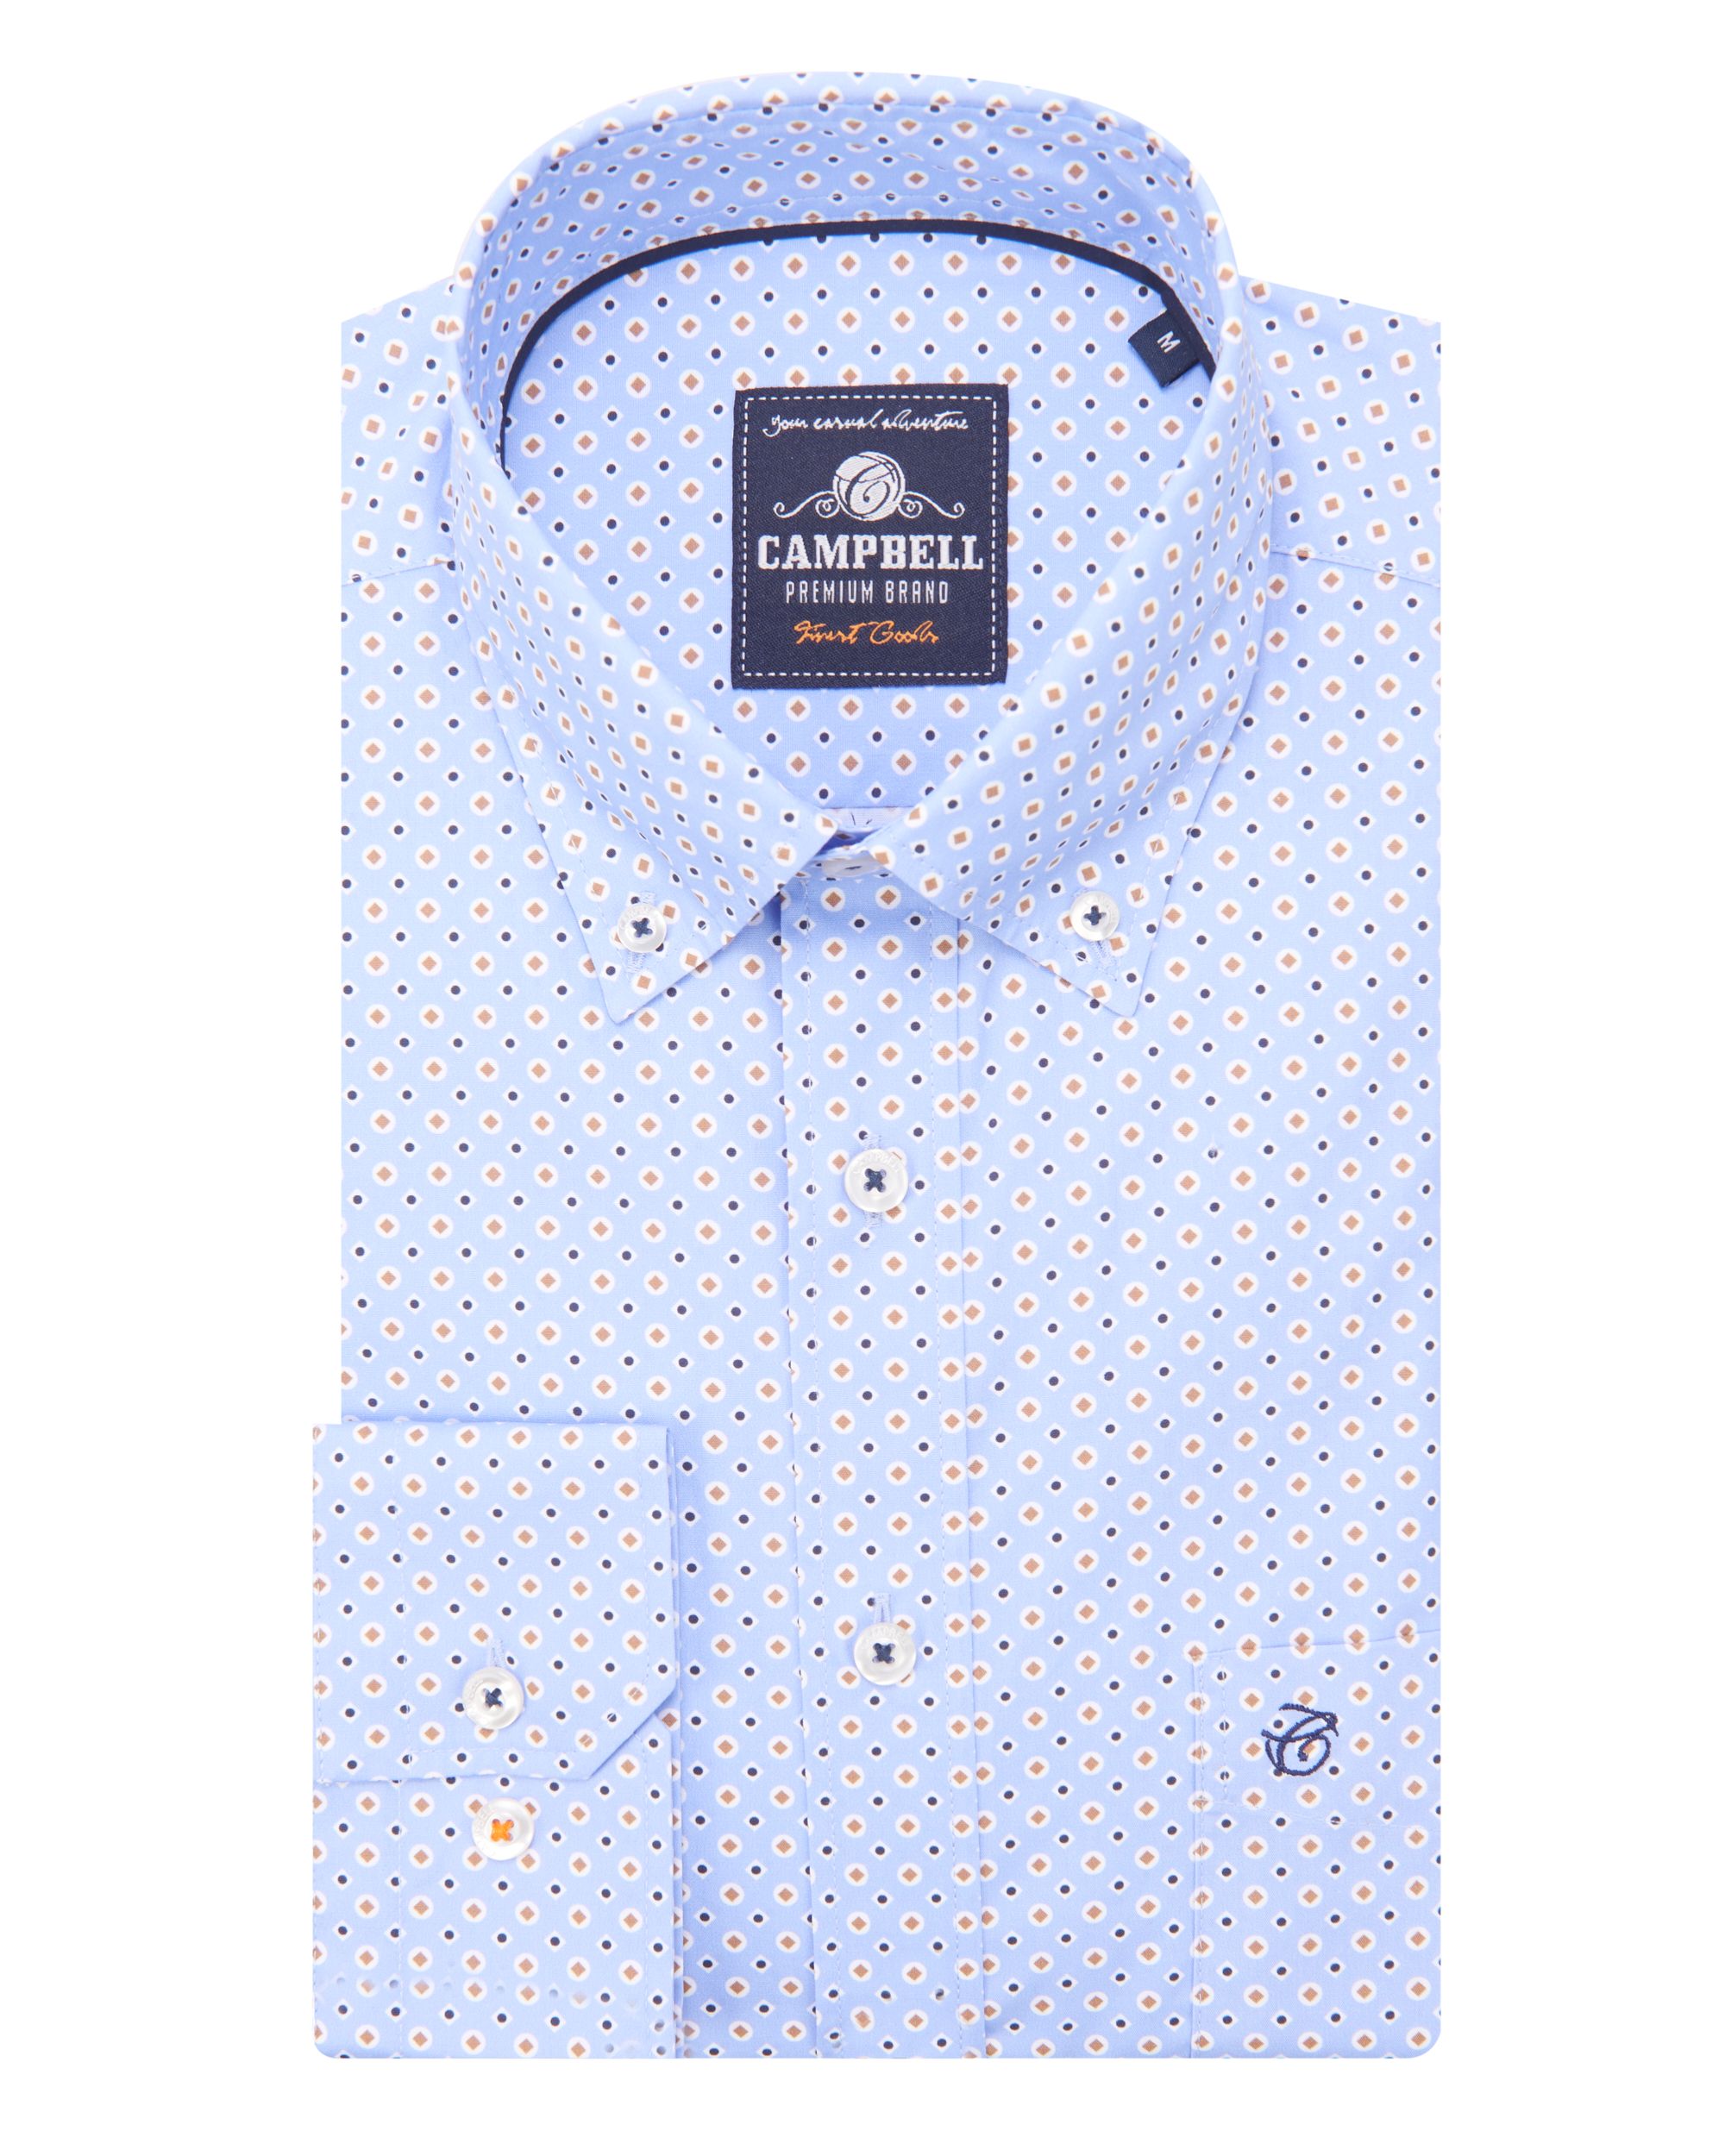 Campbell Classic Casual Overhemd LM Blauw dessin 084668-002-L